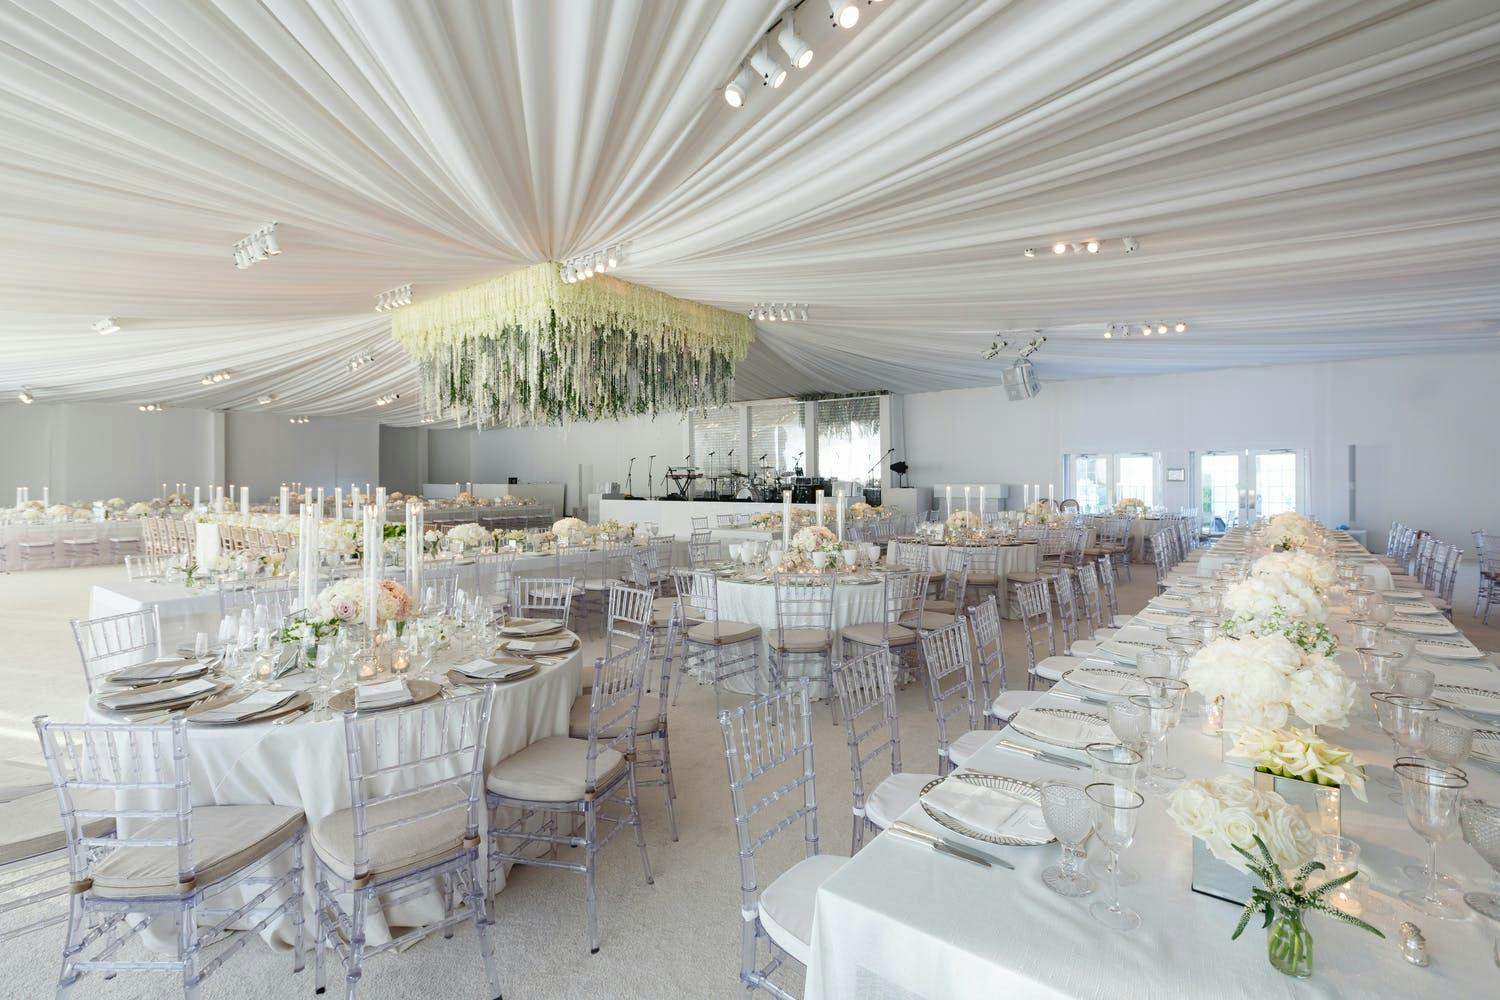 All-White Wedding Tent With Sheer Ceiling Drapery and Suspended Square Floral Focal Point | PartySlate